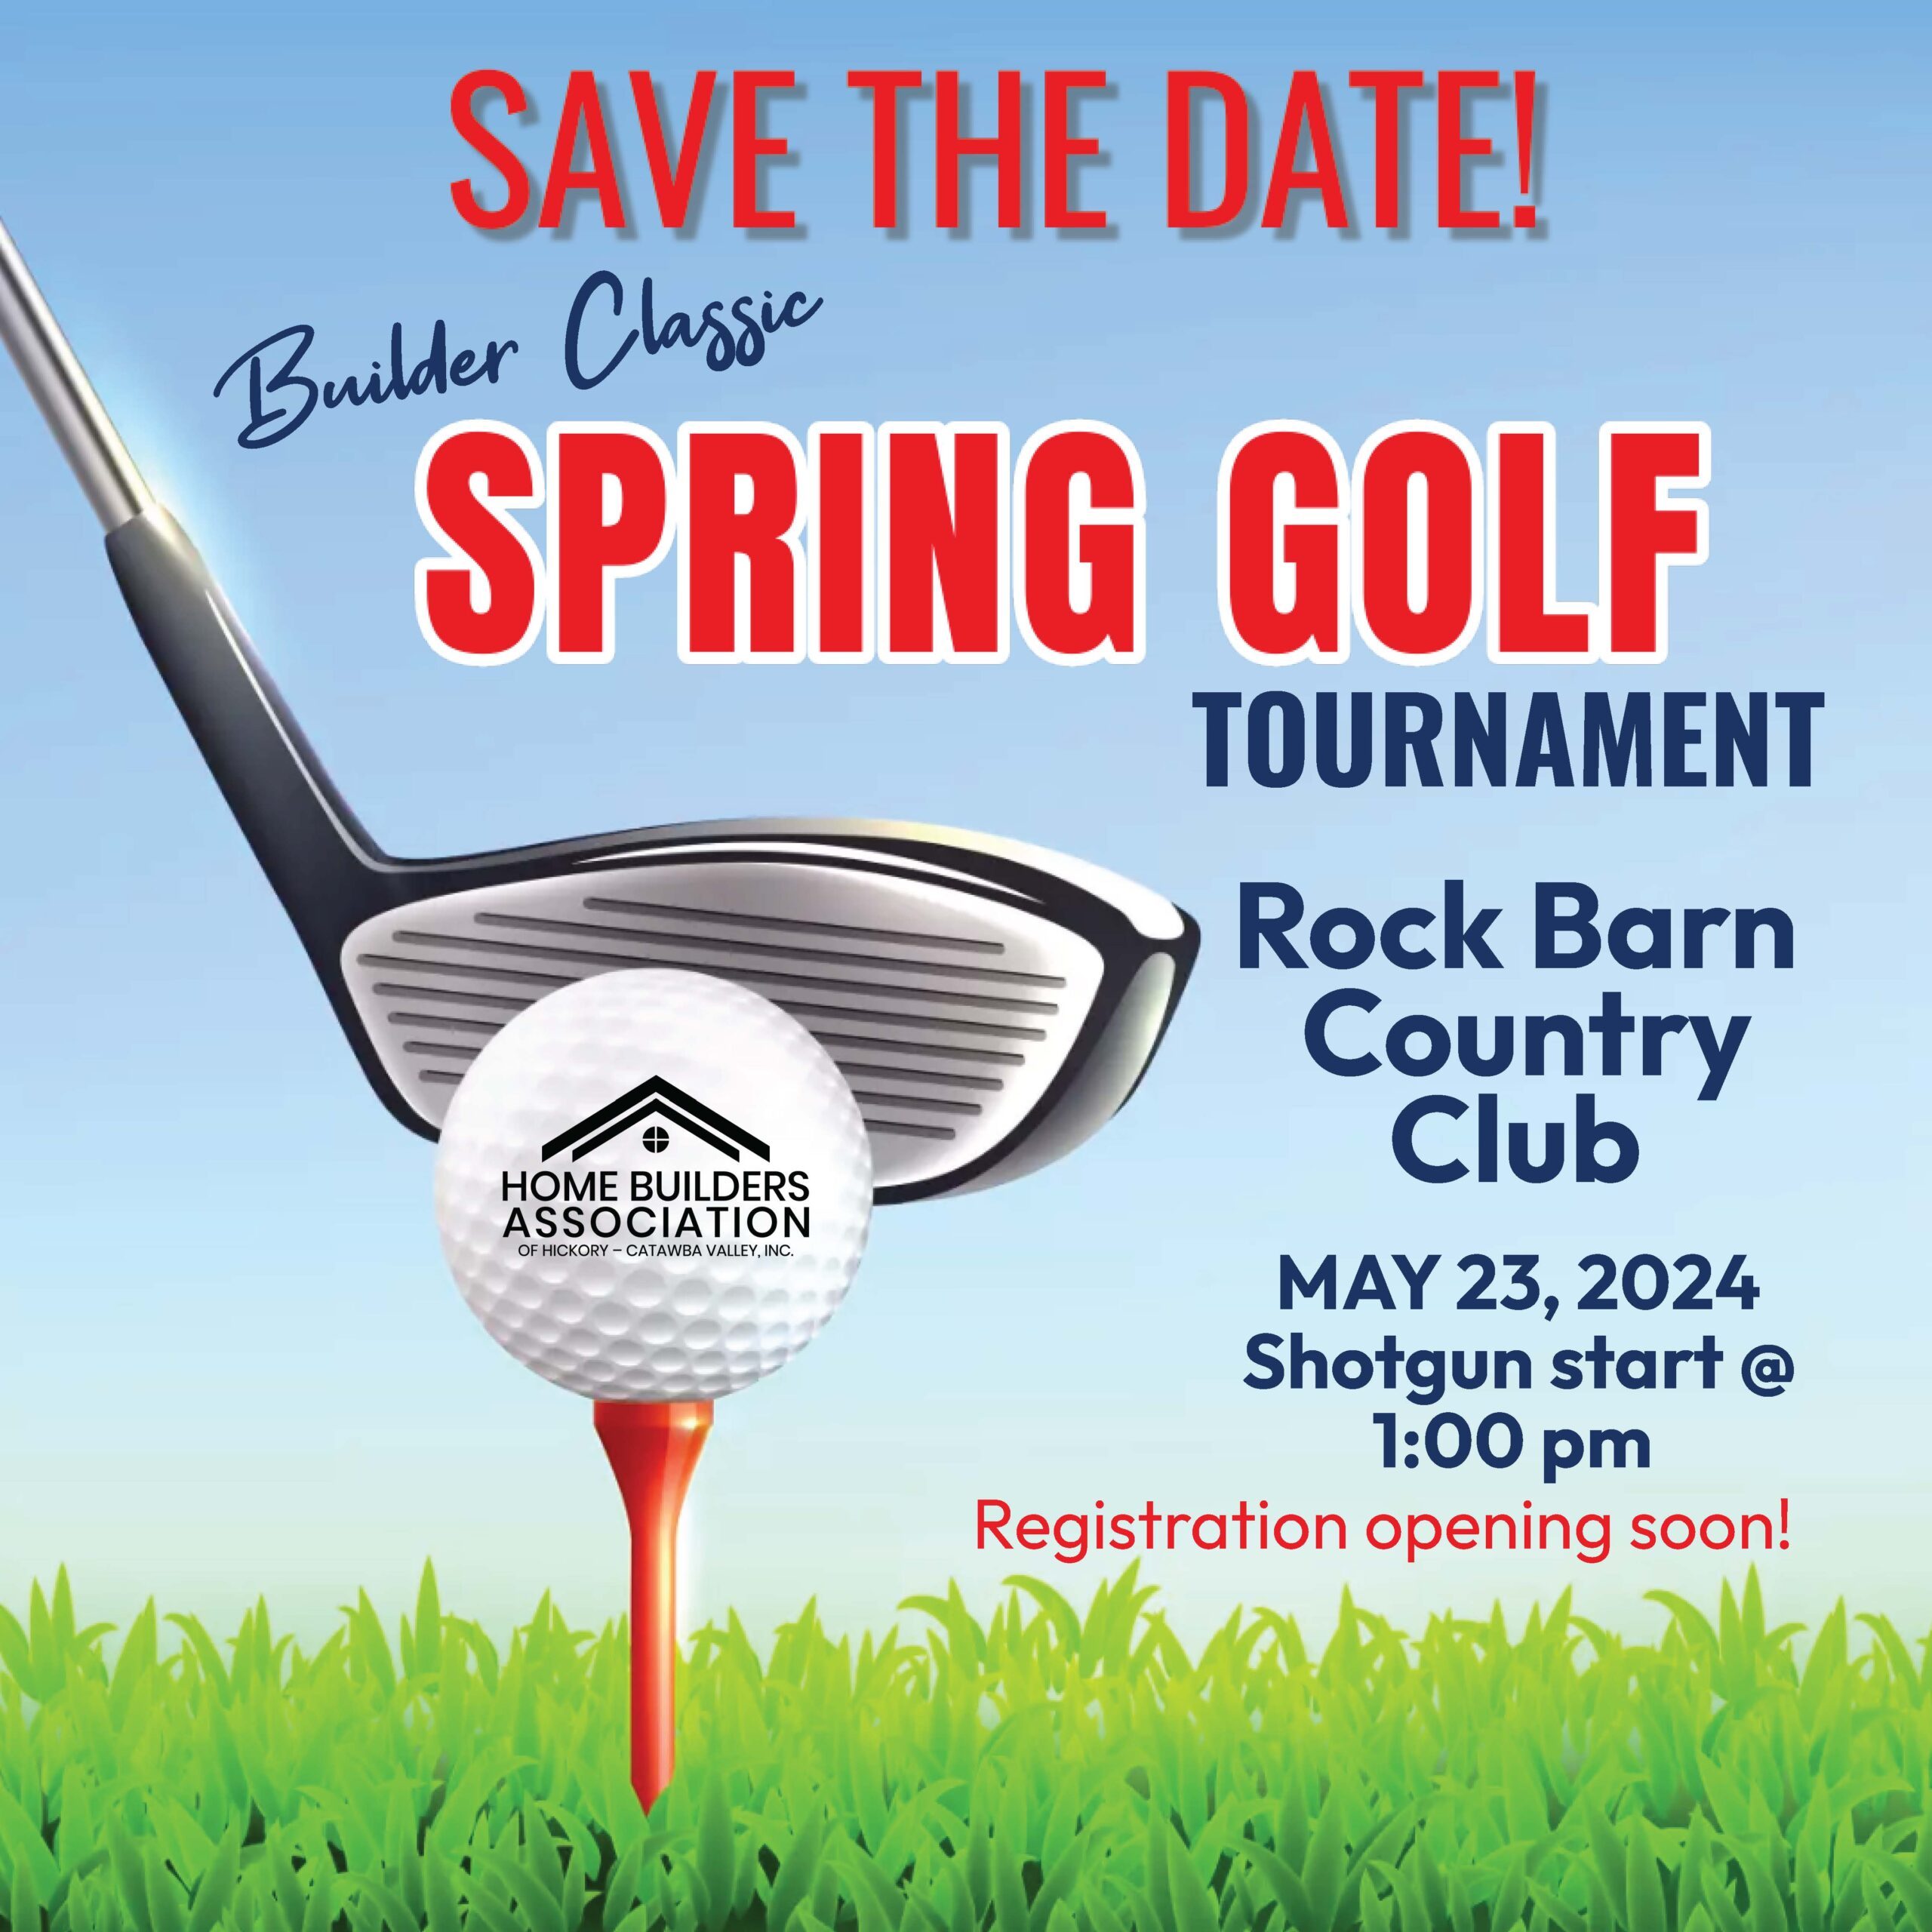 Save the date - Spring golf tournament 2024